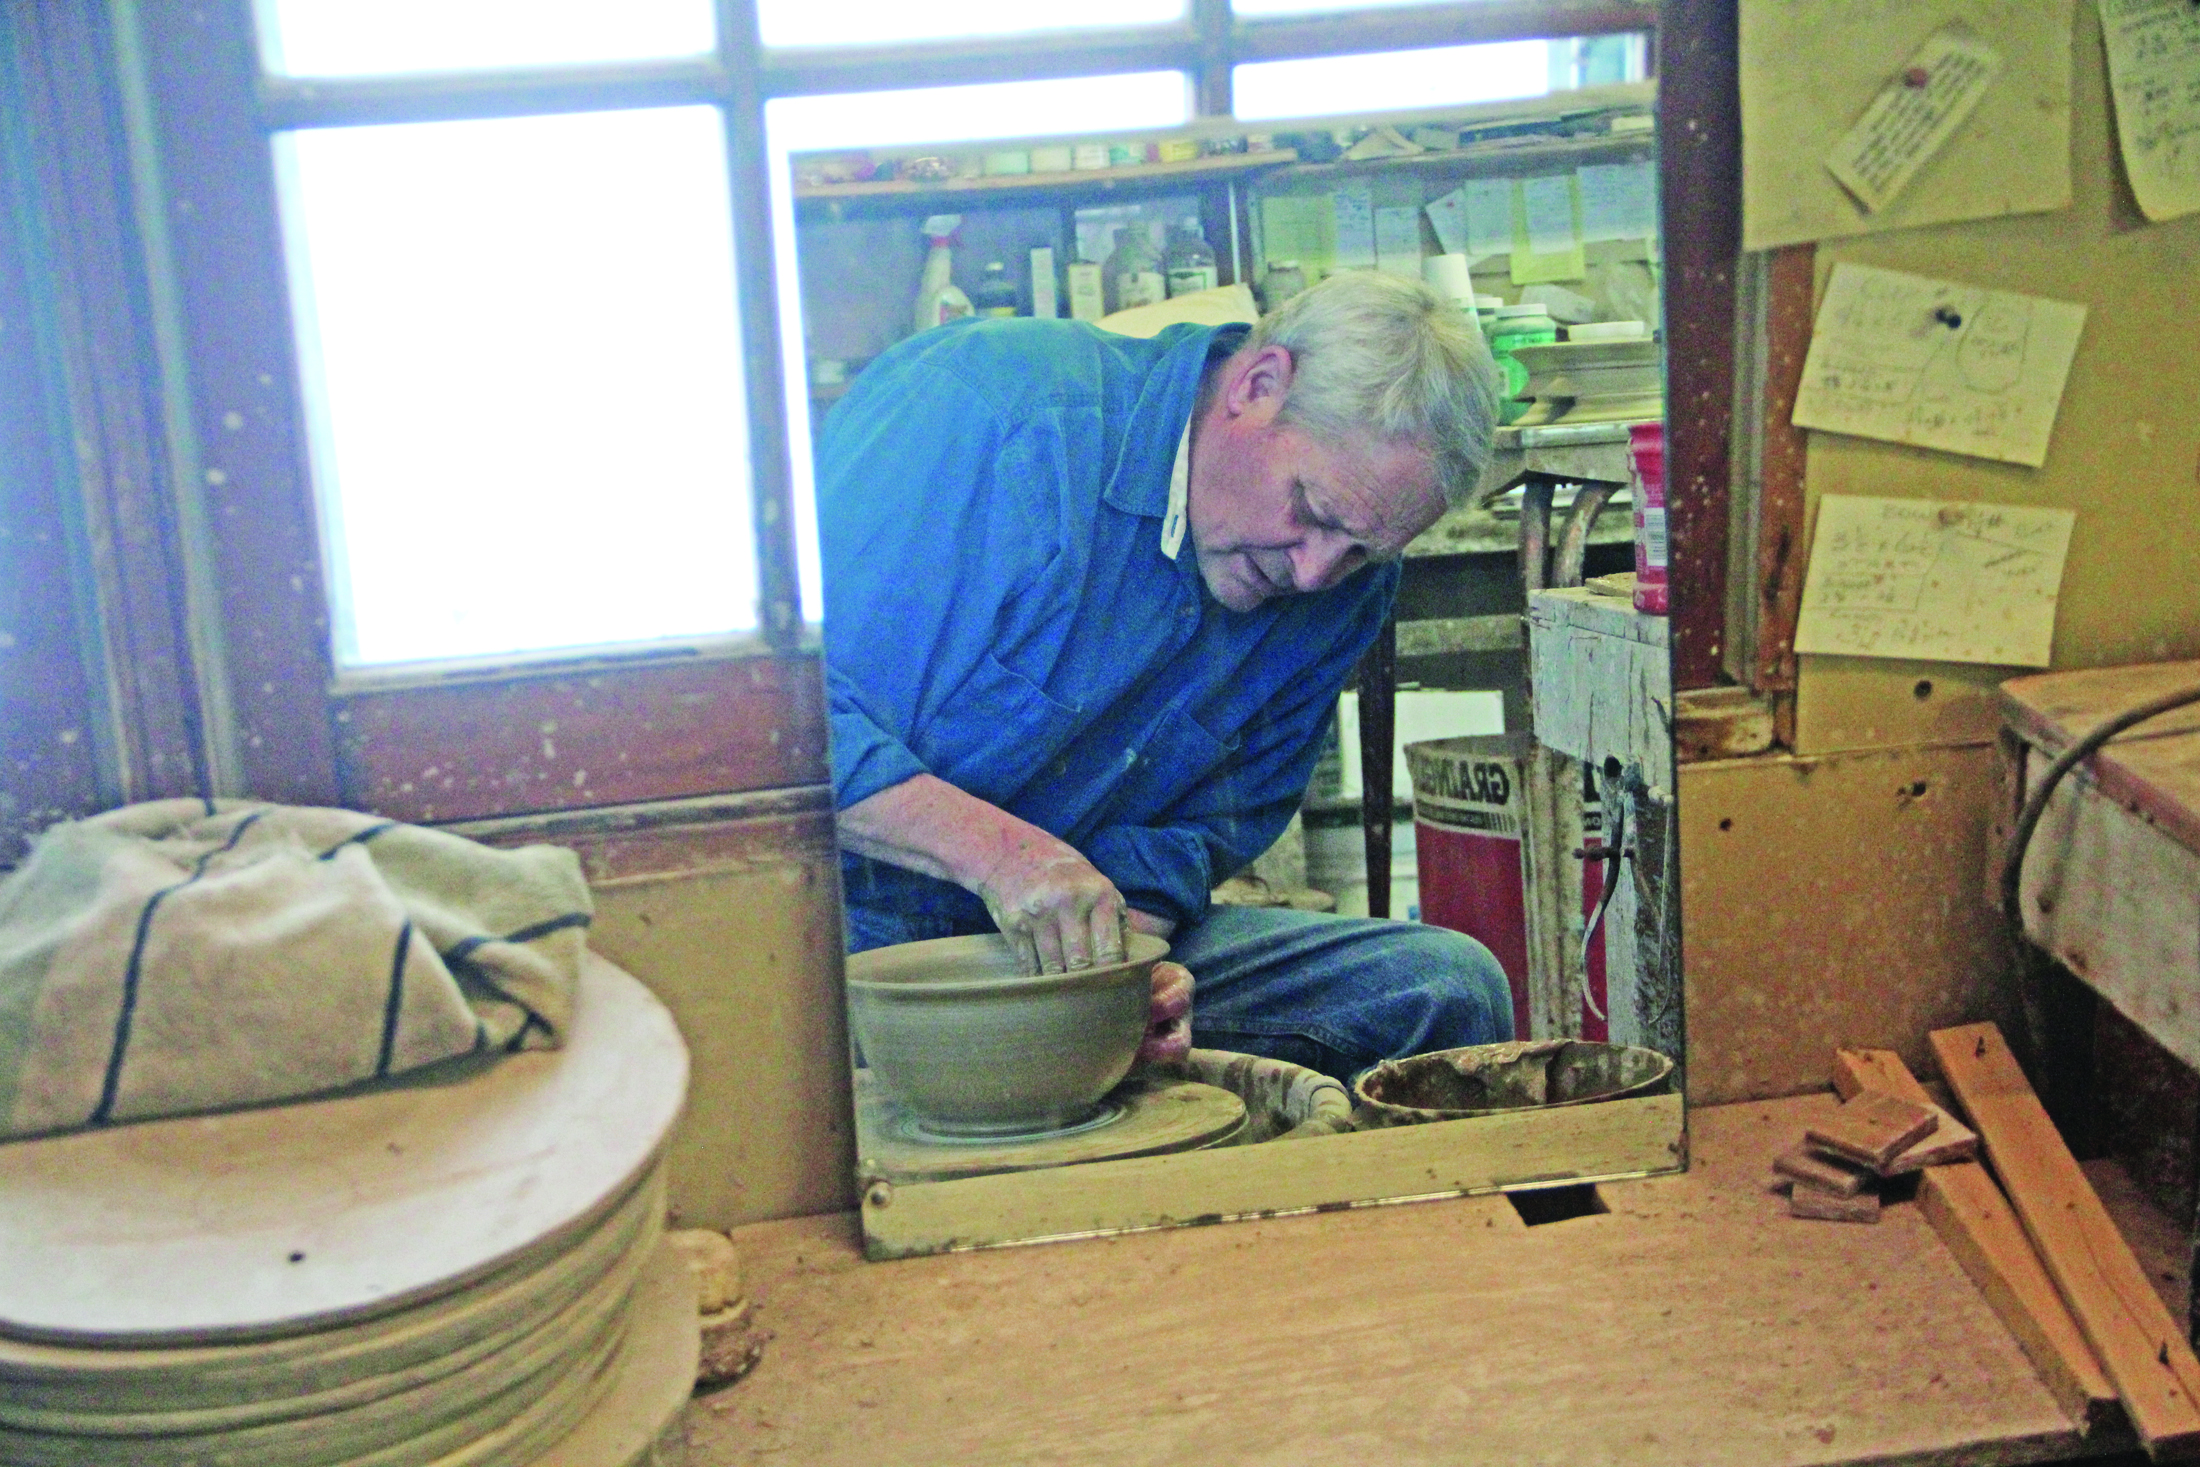 Filled with charm: Behind the creation of raku pottery